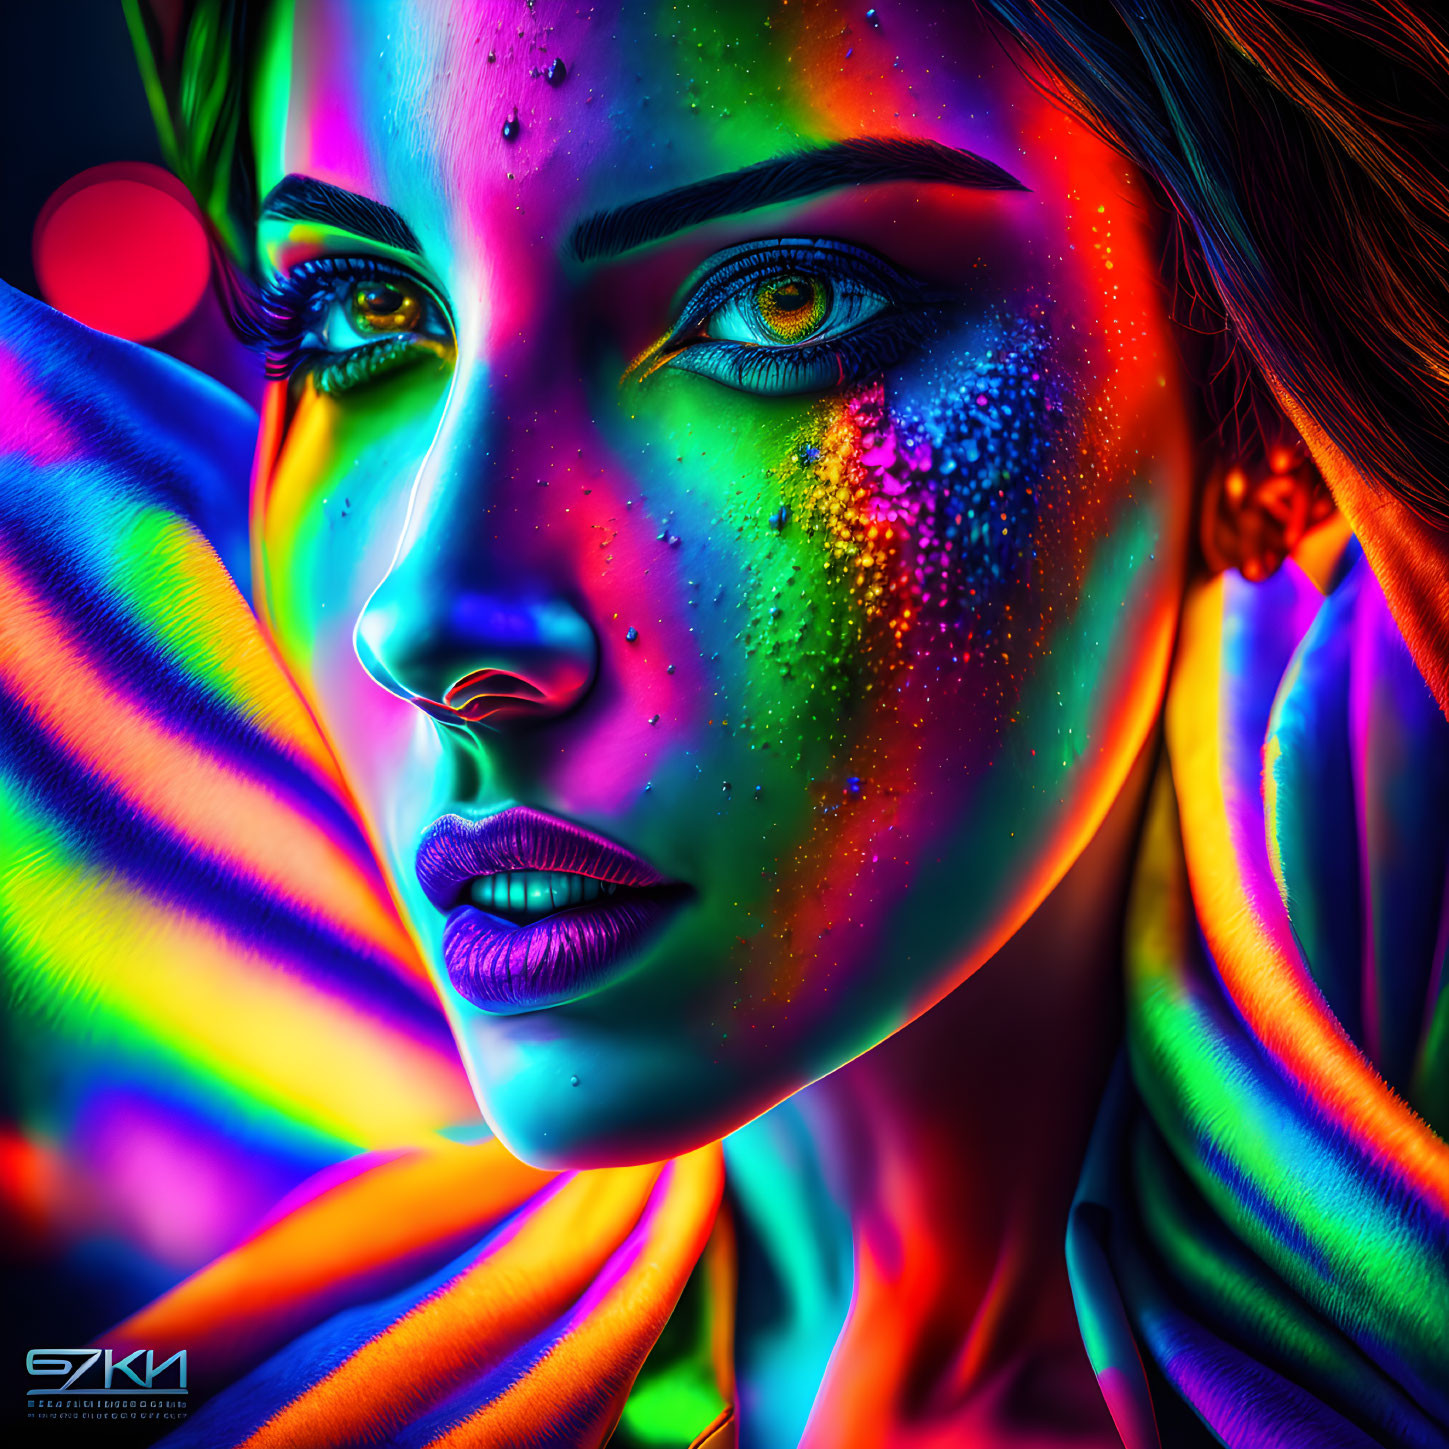 Colorful Portrait of Woman with Neon Colors and Glittery Makeup